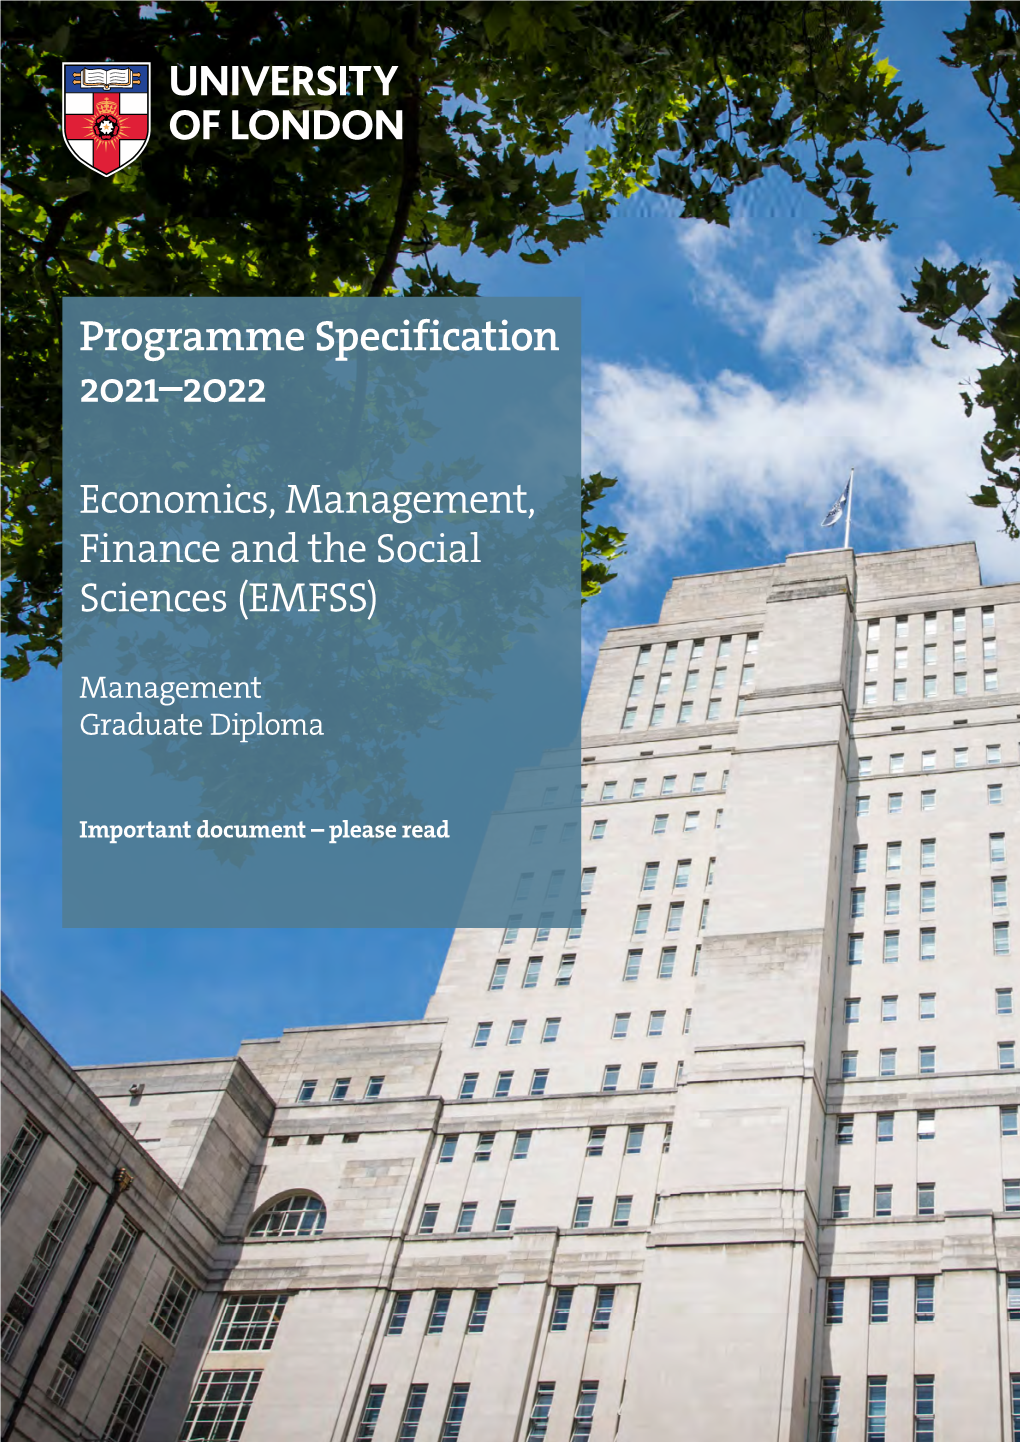 Programme Specification Graduate Diploma in Management 2021-22